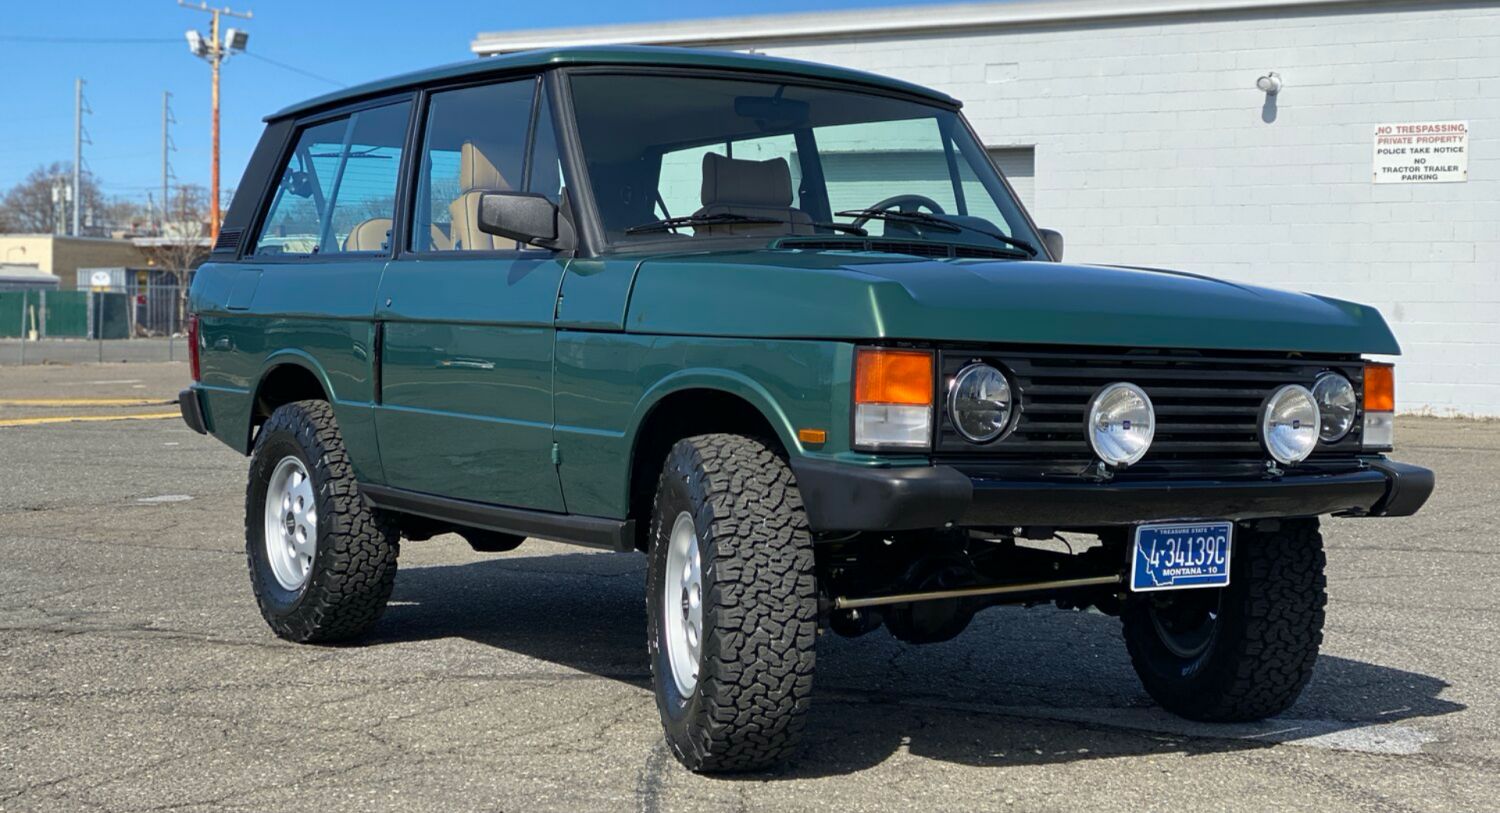 Legacy Overland Restomods A 1990 Range Rover Classic With 430 HP LS3 V8